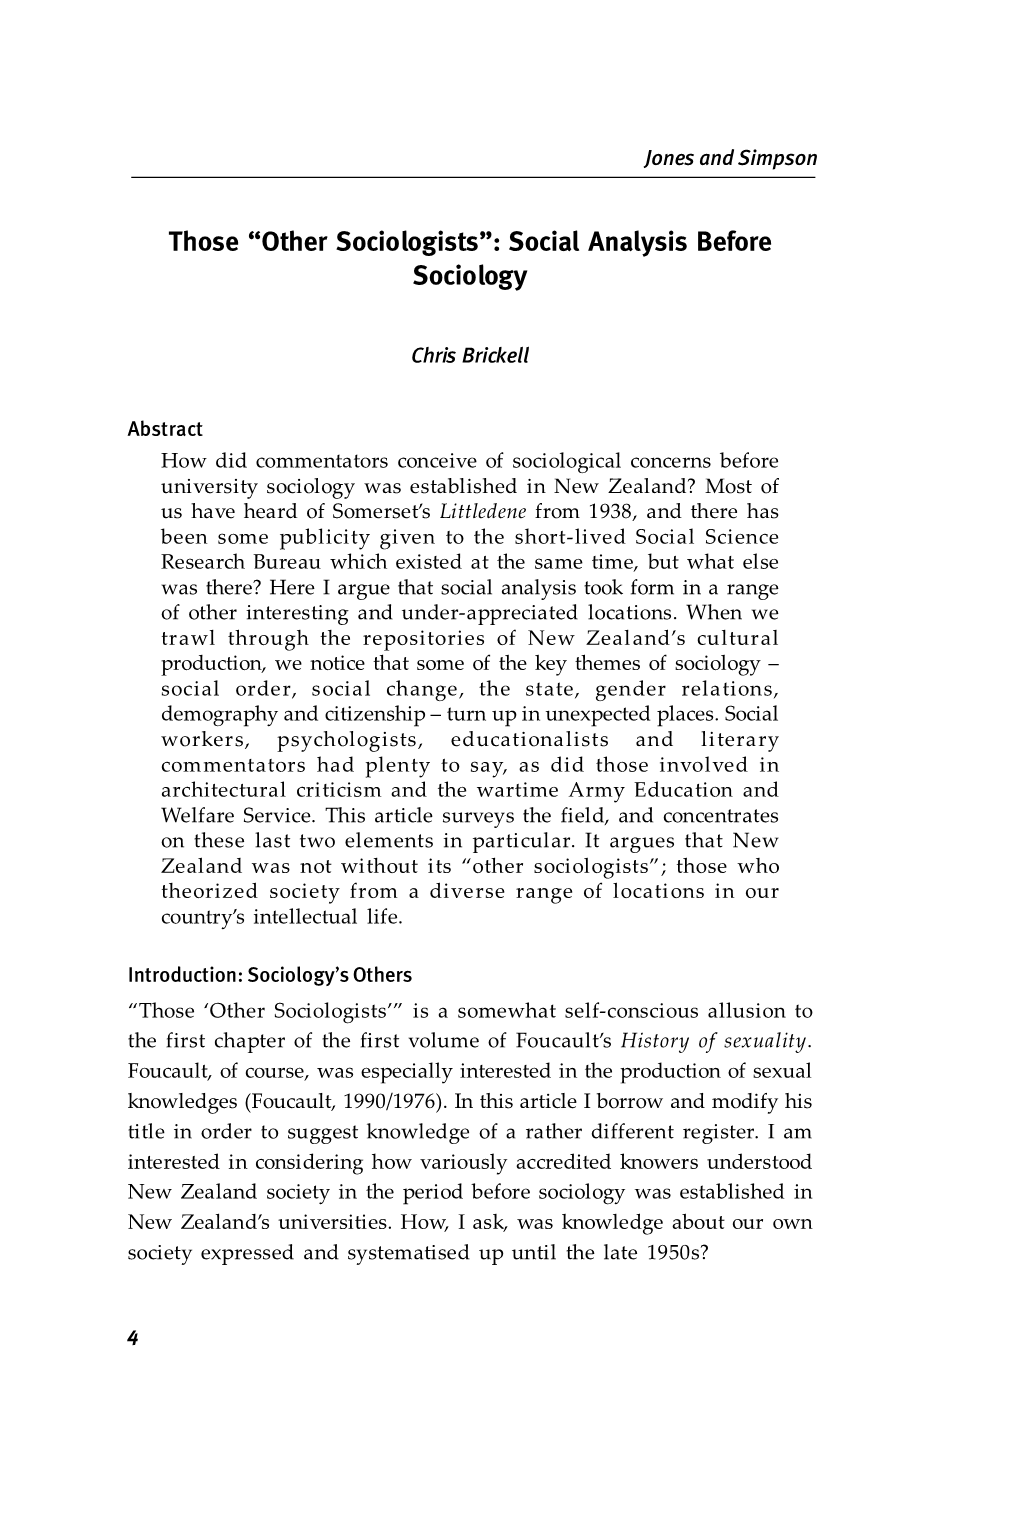 Those “Other Sociologists”: Social Analysis Before Sociology